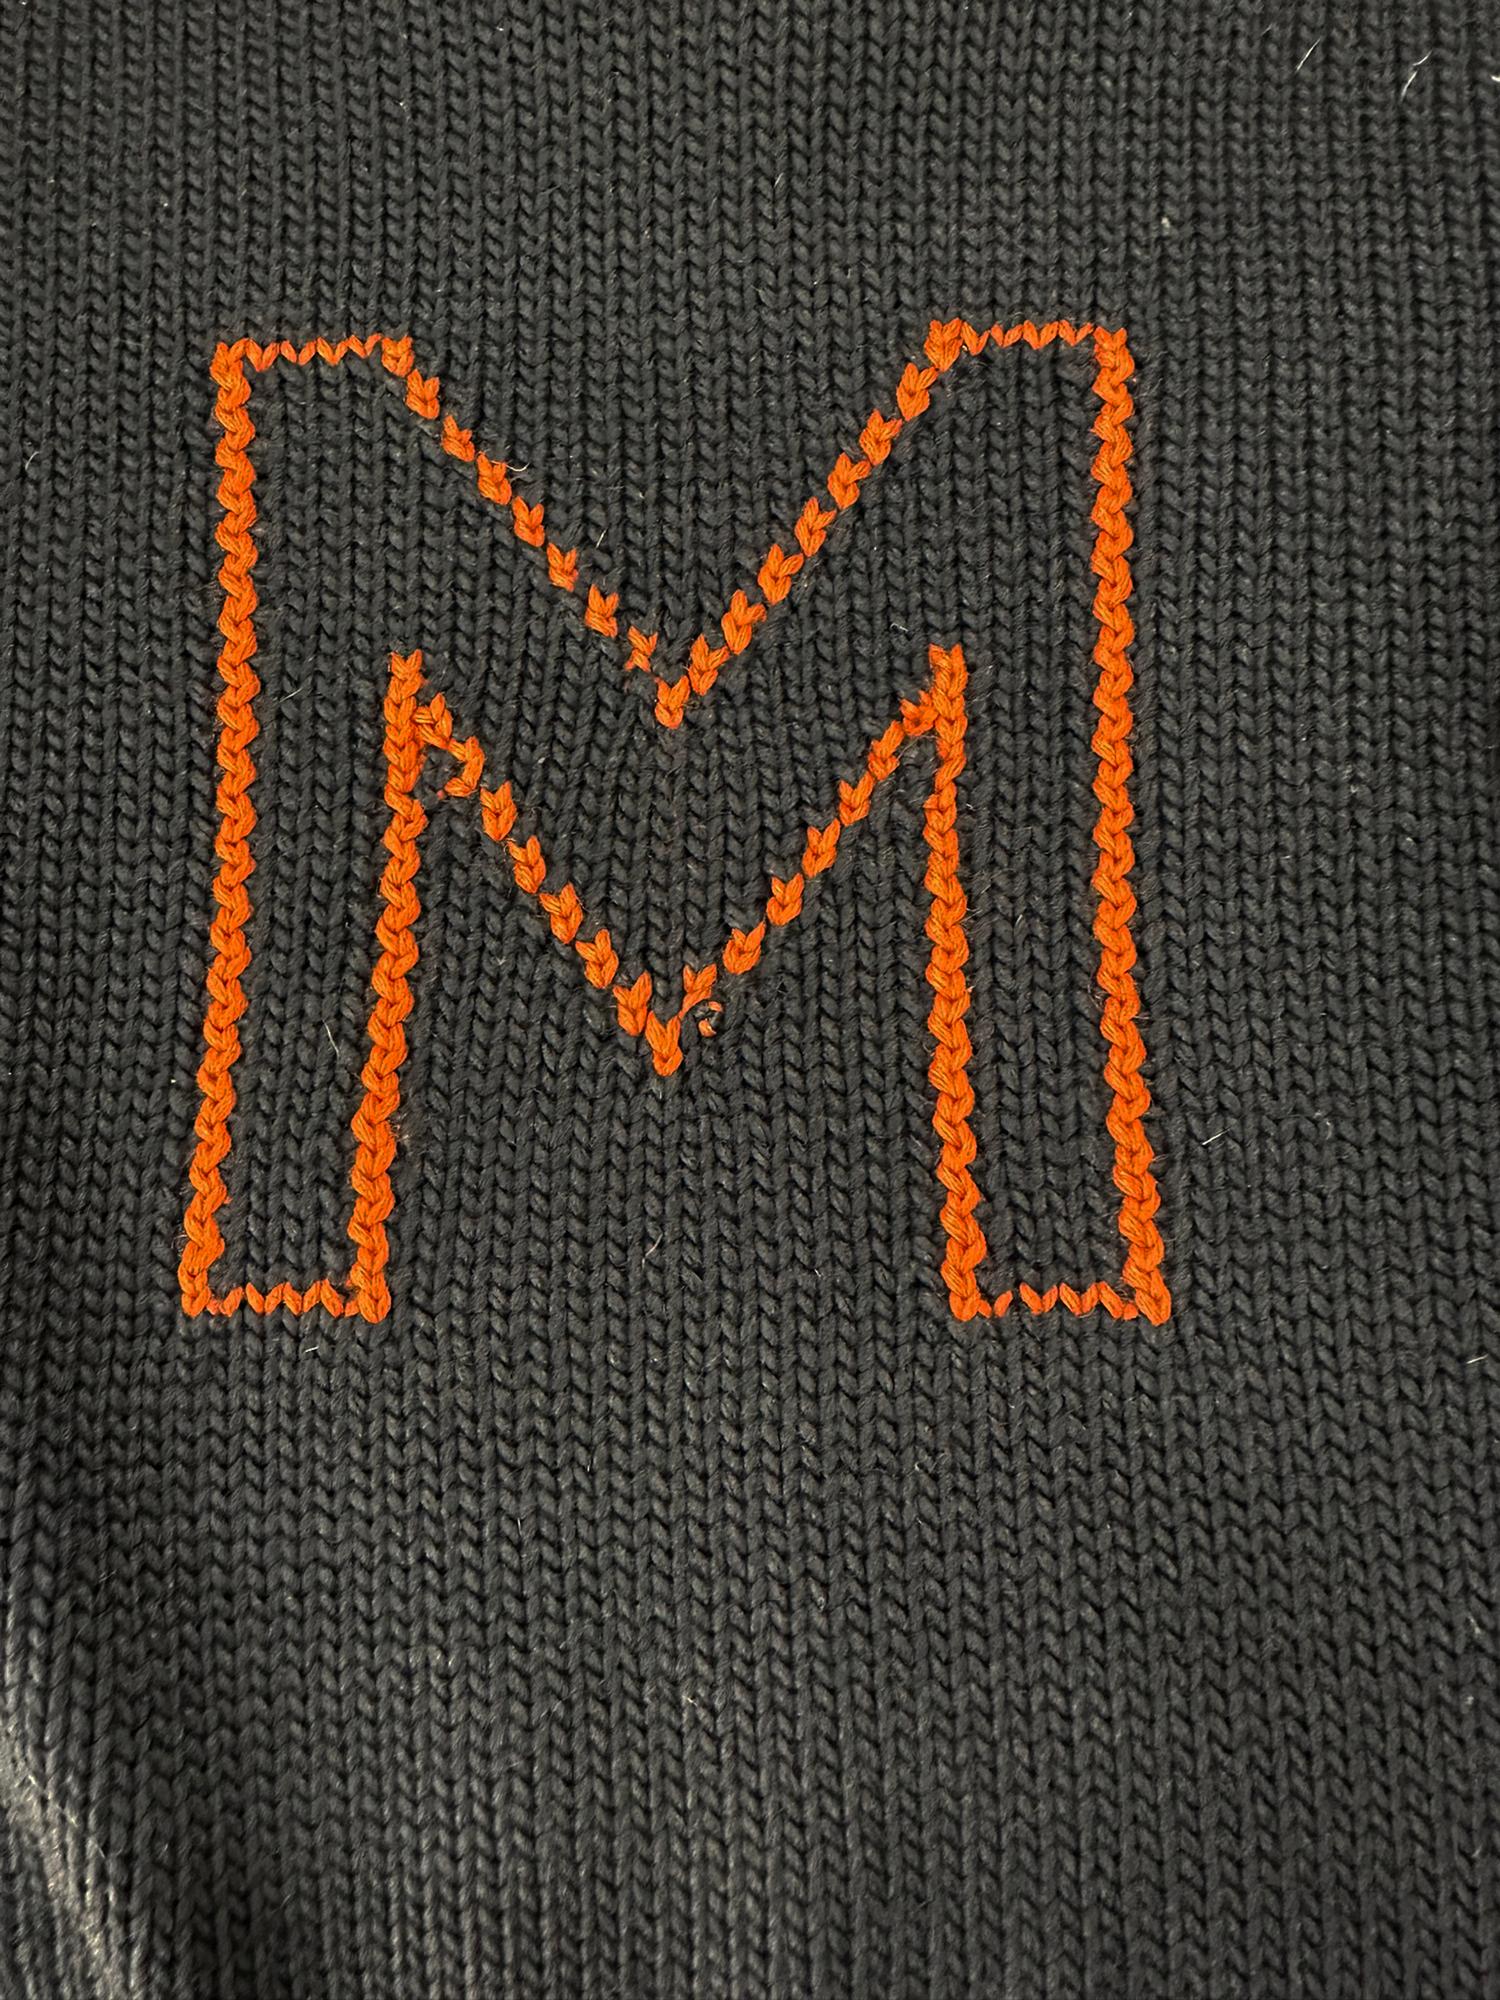 Milton Academy Mass. early 1900s varsity  School Sweater dark blue 100% wool with orange H knitted in at the front. Classic school wool letter sweater, boat neck, long sleeves with deep ribbed cuffs, deep ribbed hem. Fits an adult small. The label